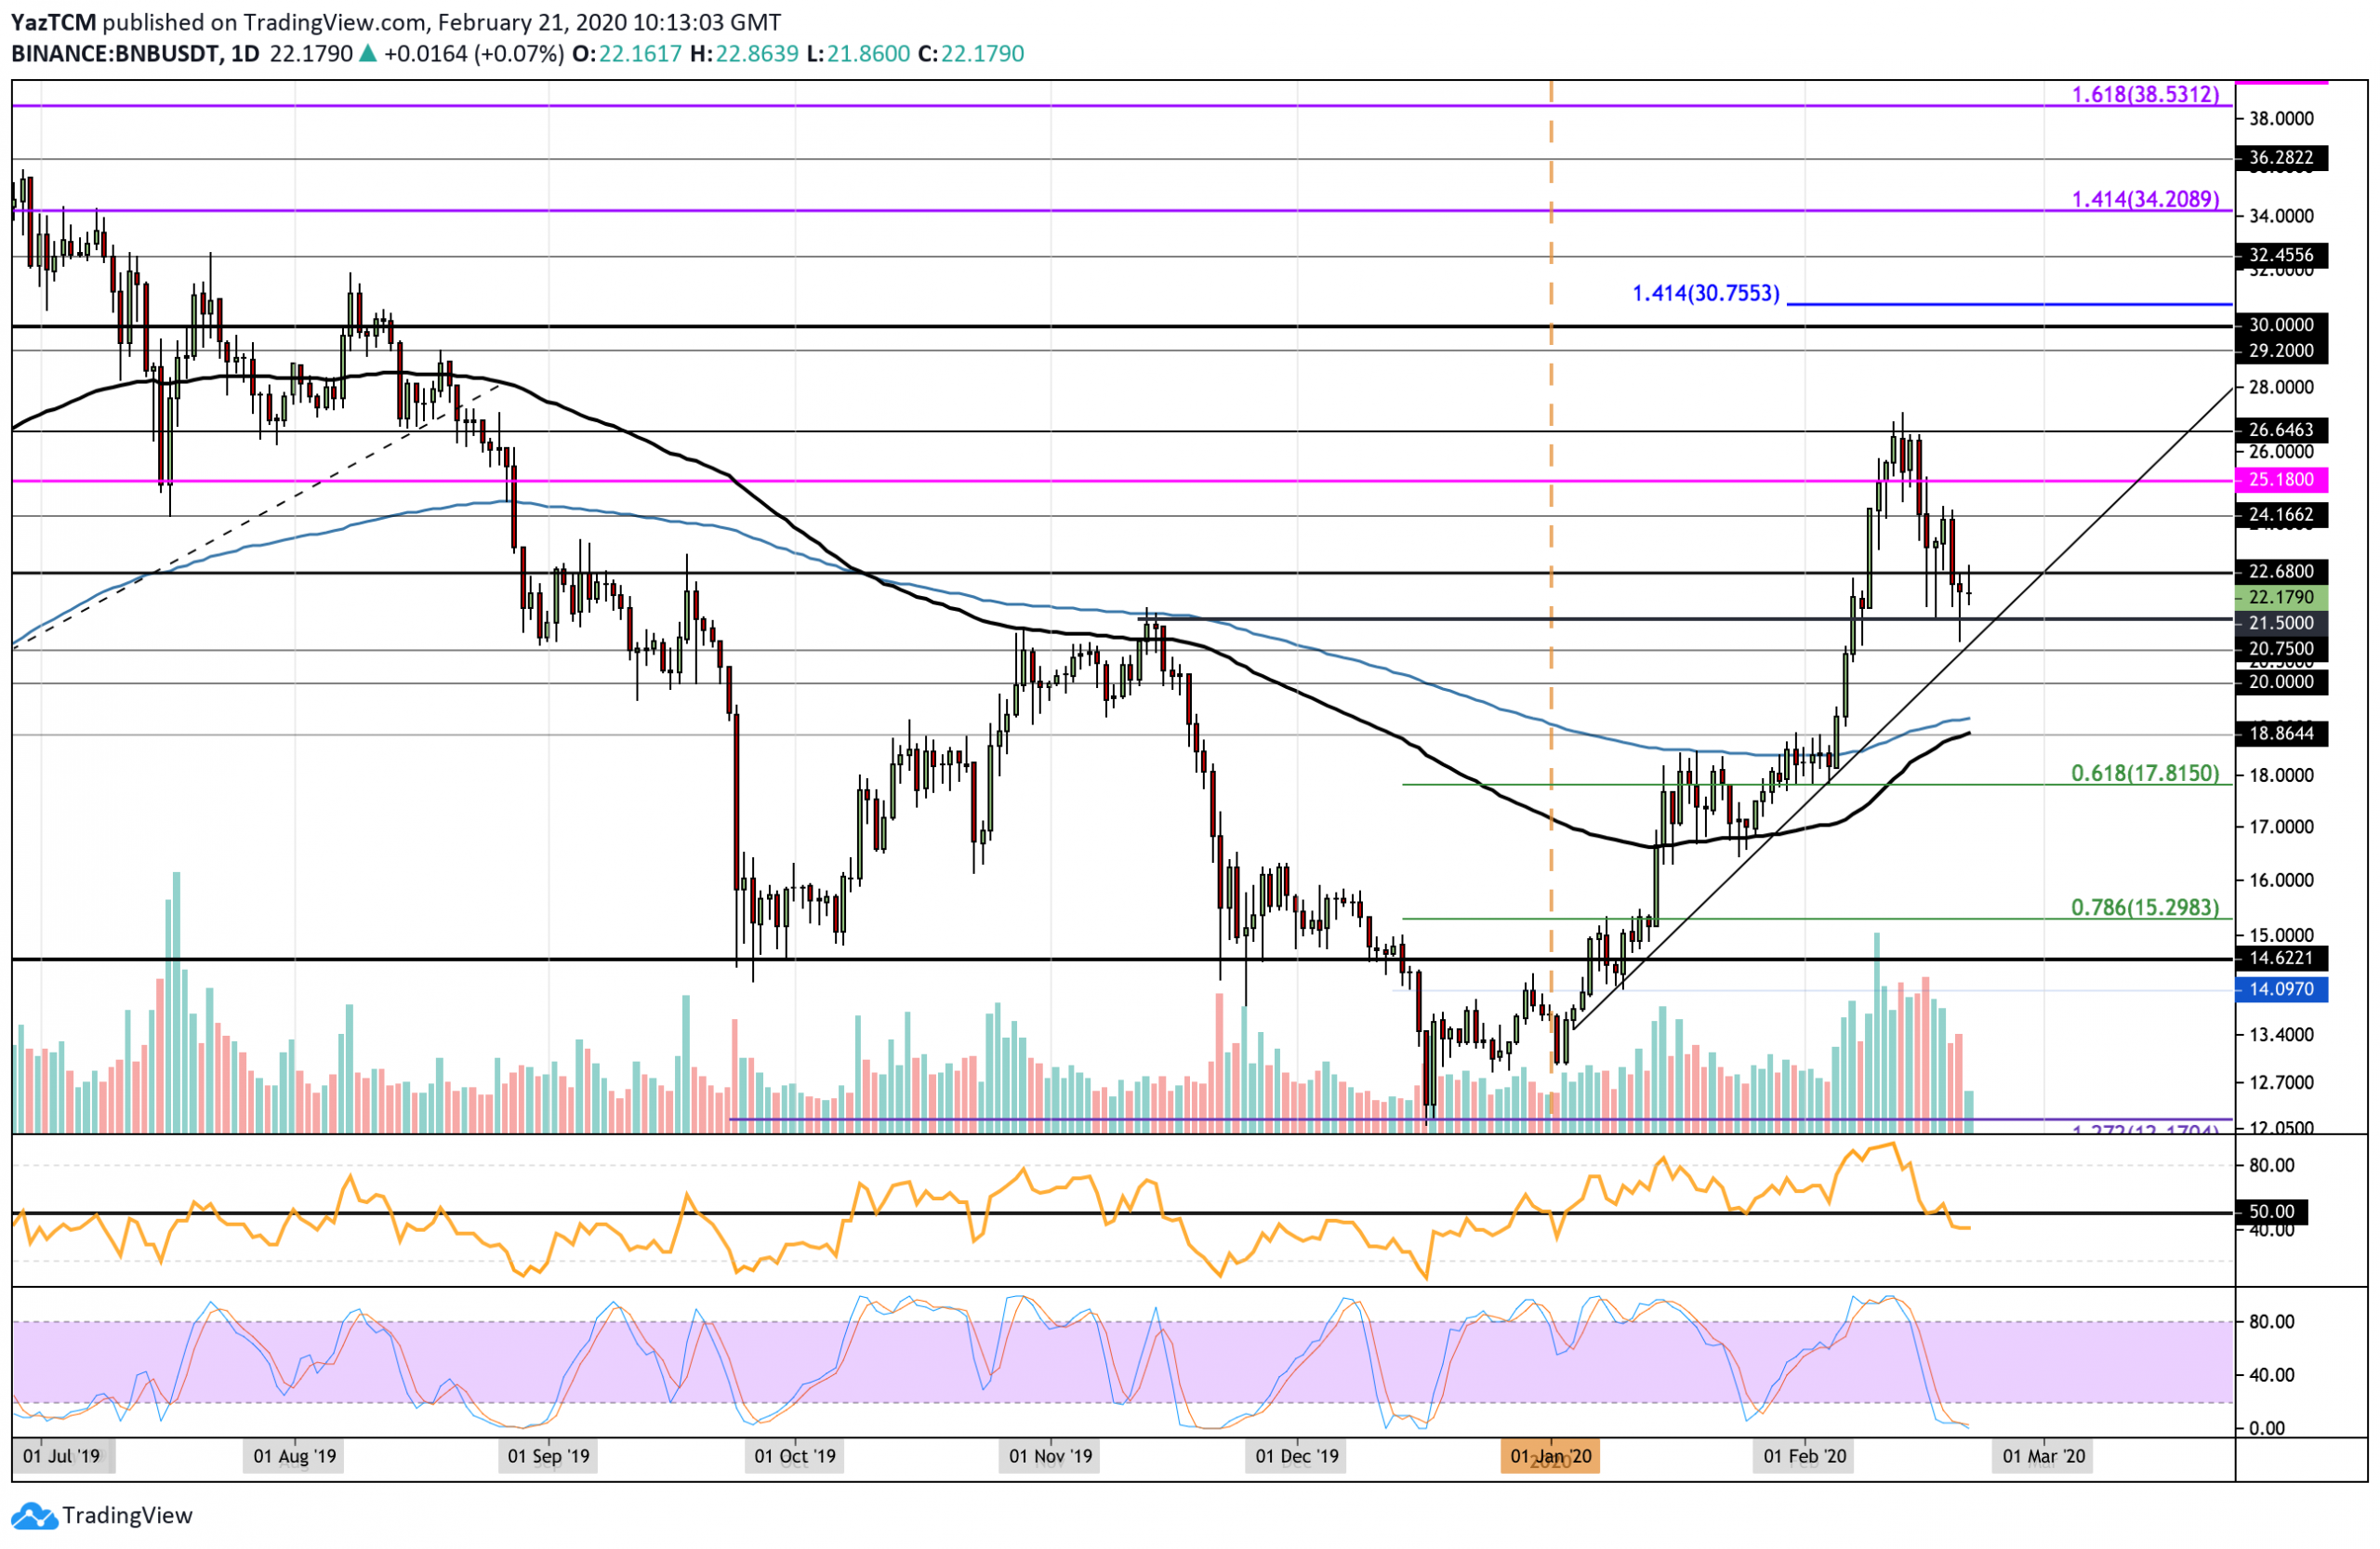 Crypto Price Analysis & Overview February 21st: Bitcoin, Ethereum, Ripple, Tezos, and Binance Coin